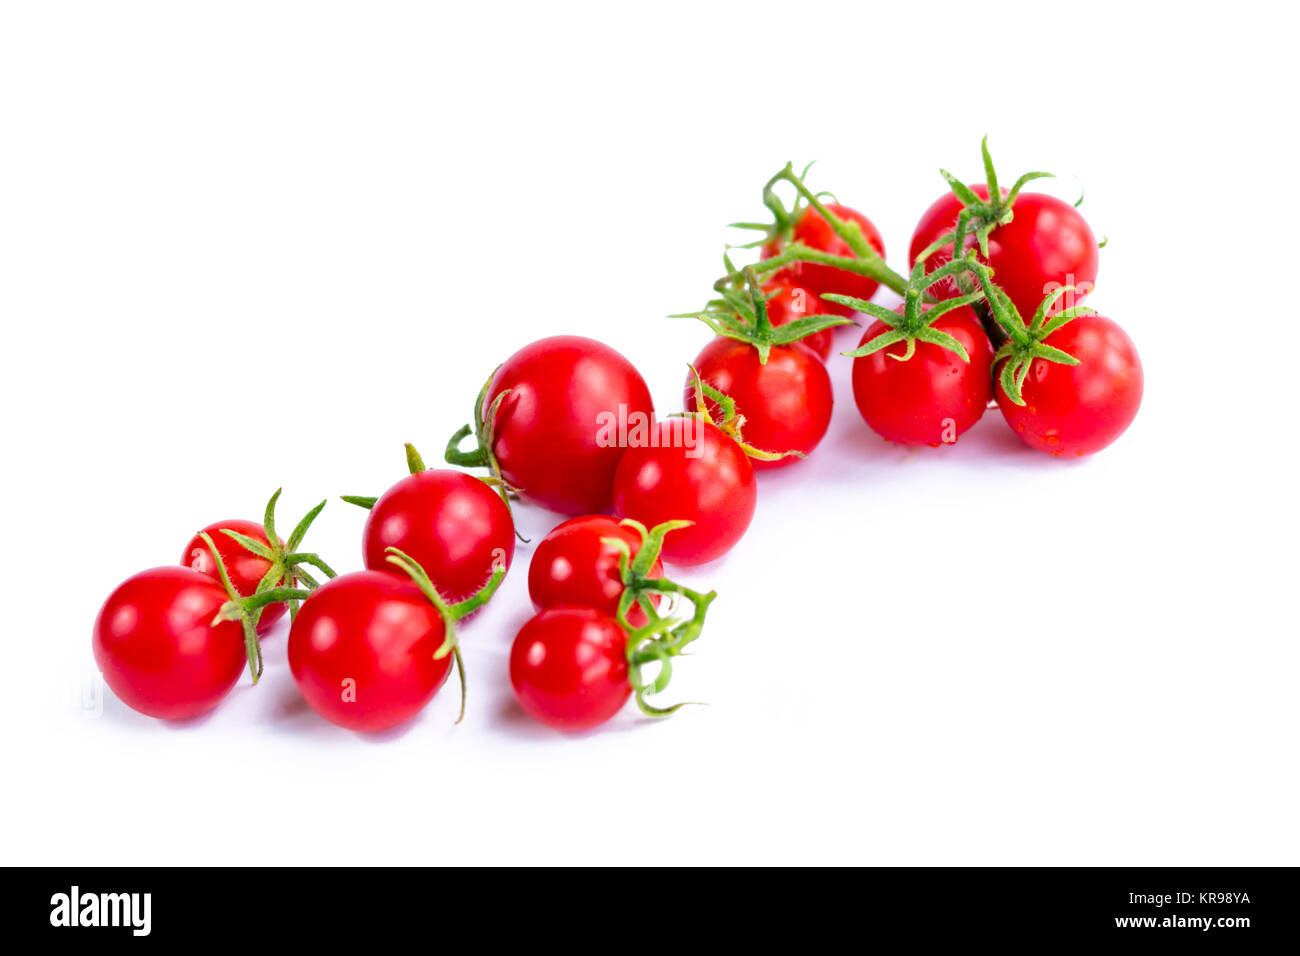 Cluster of tomatoes on white background Stock Photo